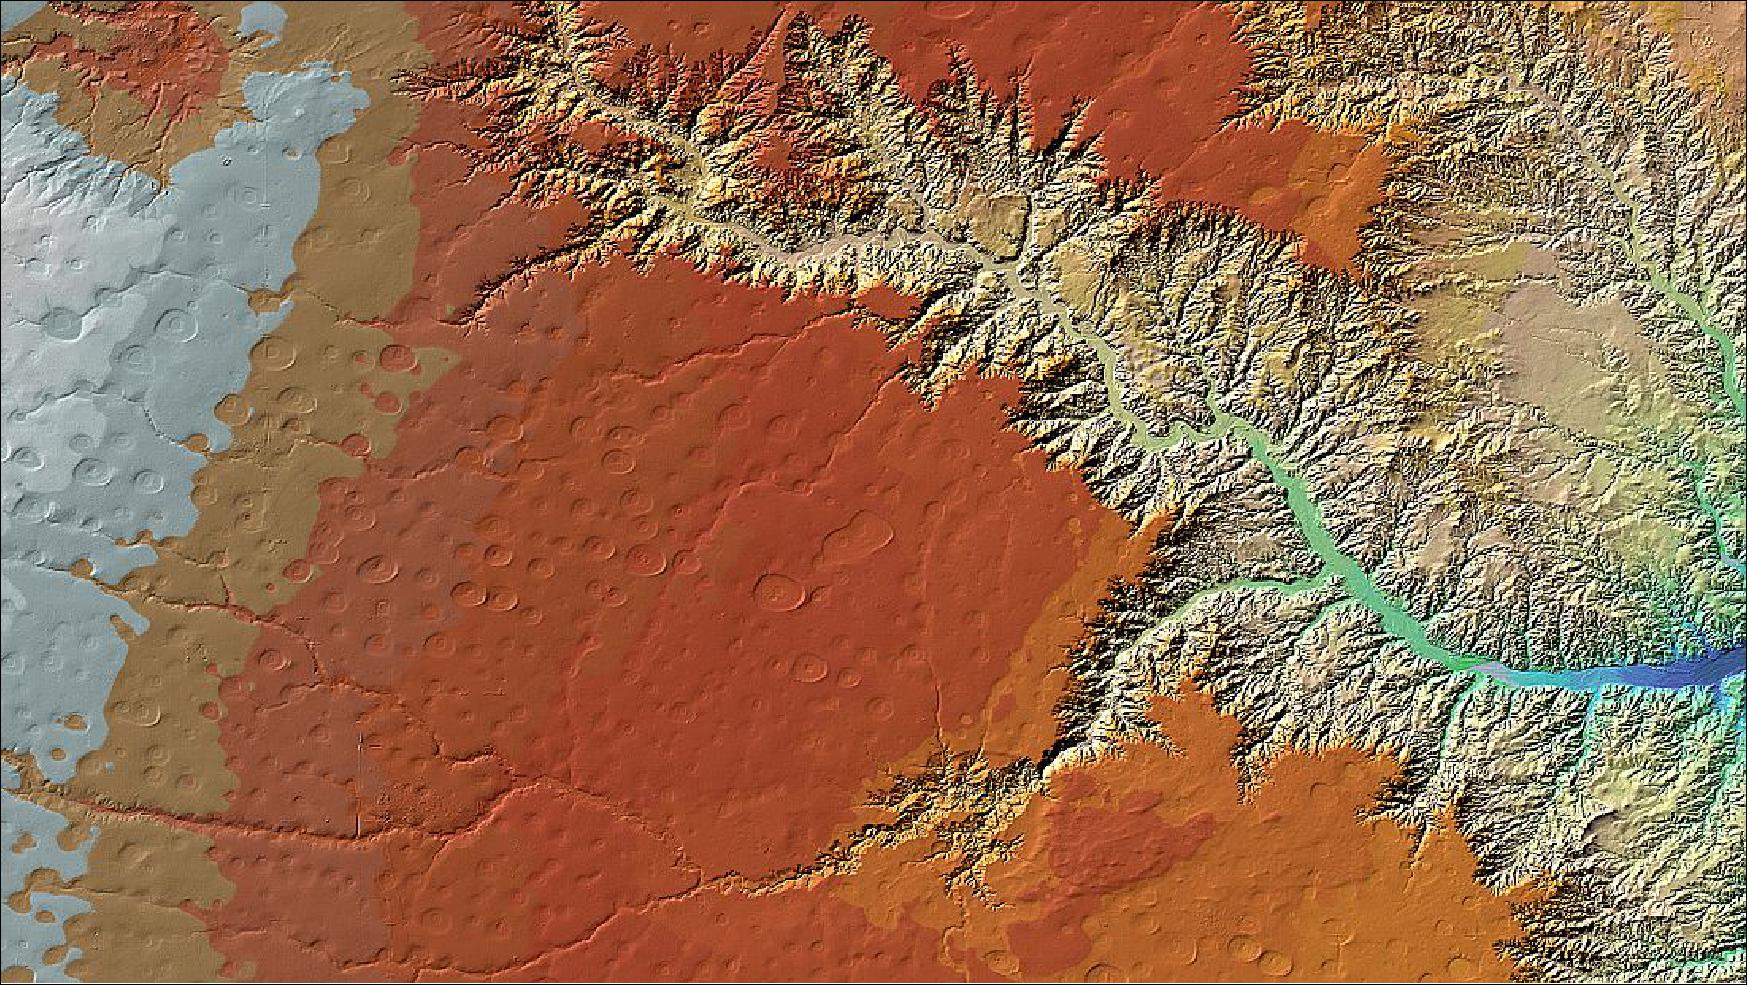 Figure 62: TanDEM mission elevation model of the Palo Duro Canyon, Texas, USA (image credit: DLR)